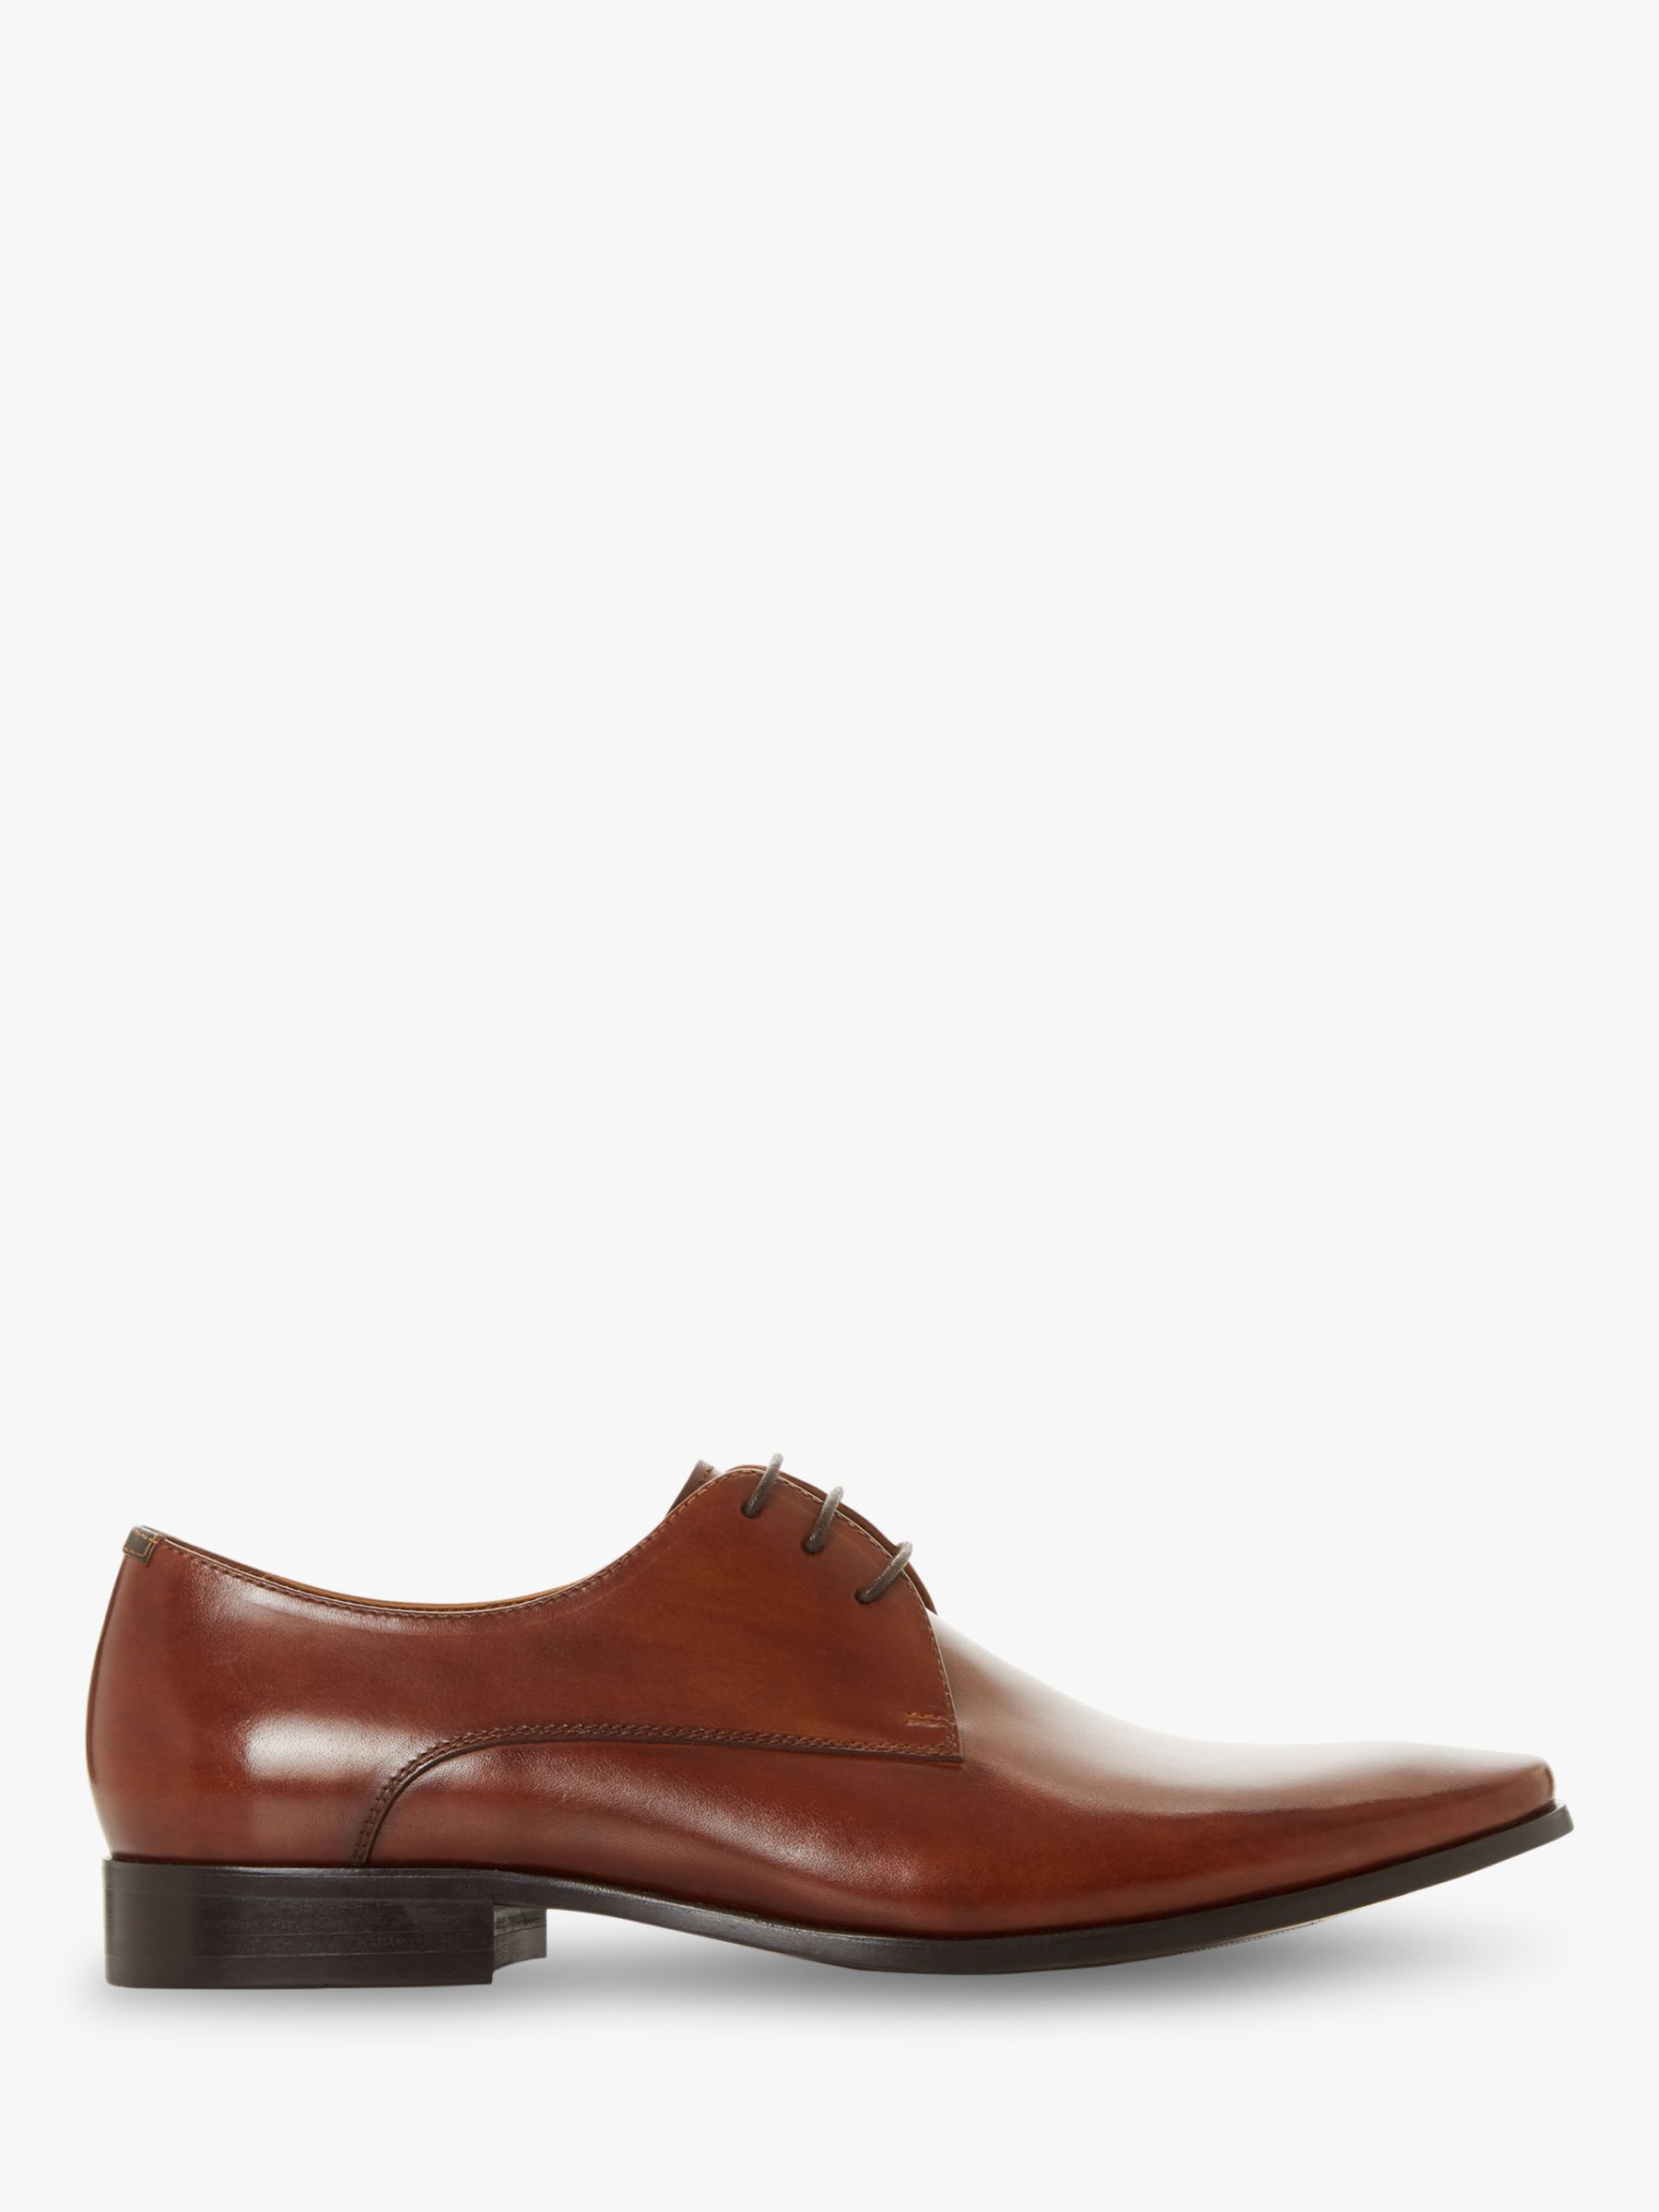 Dune Streamline Leather Shoes